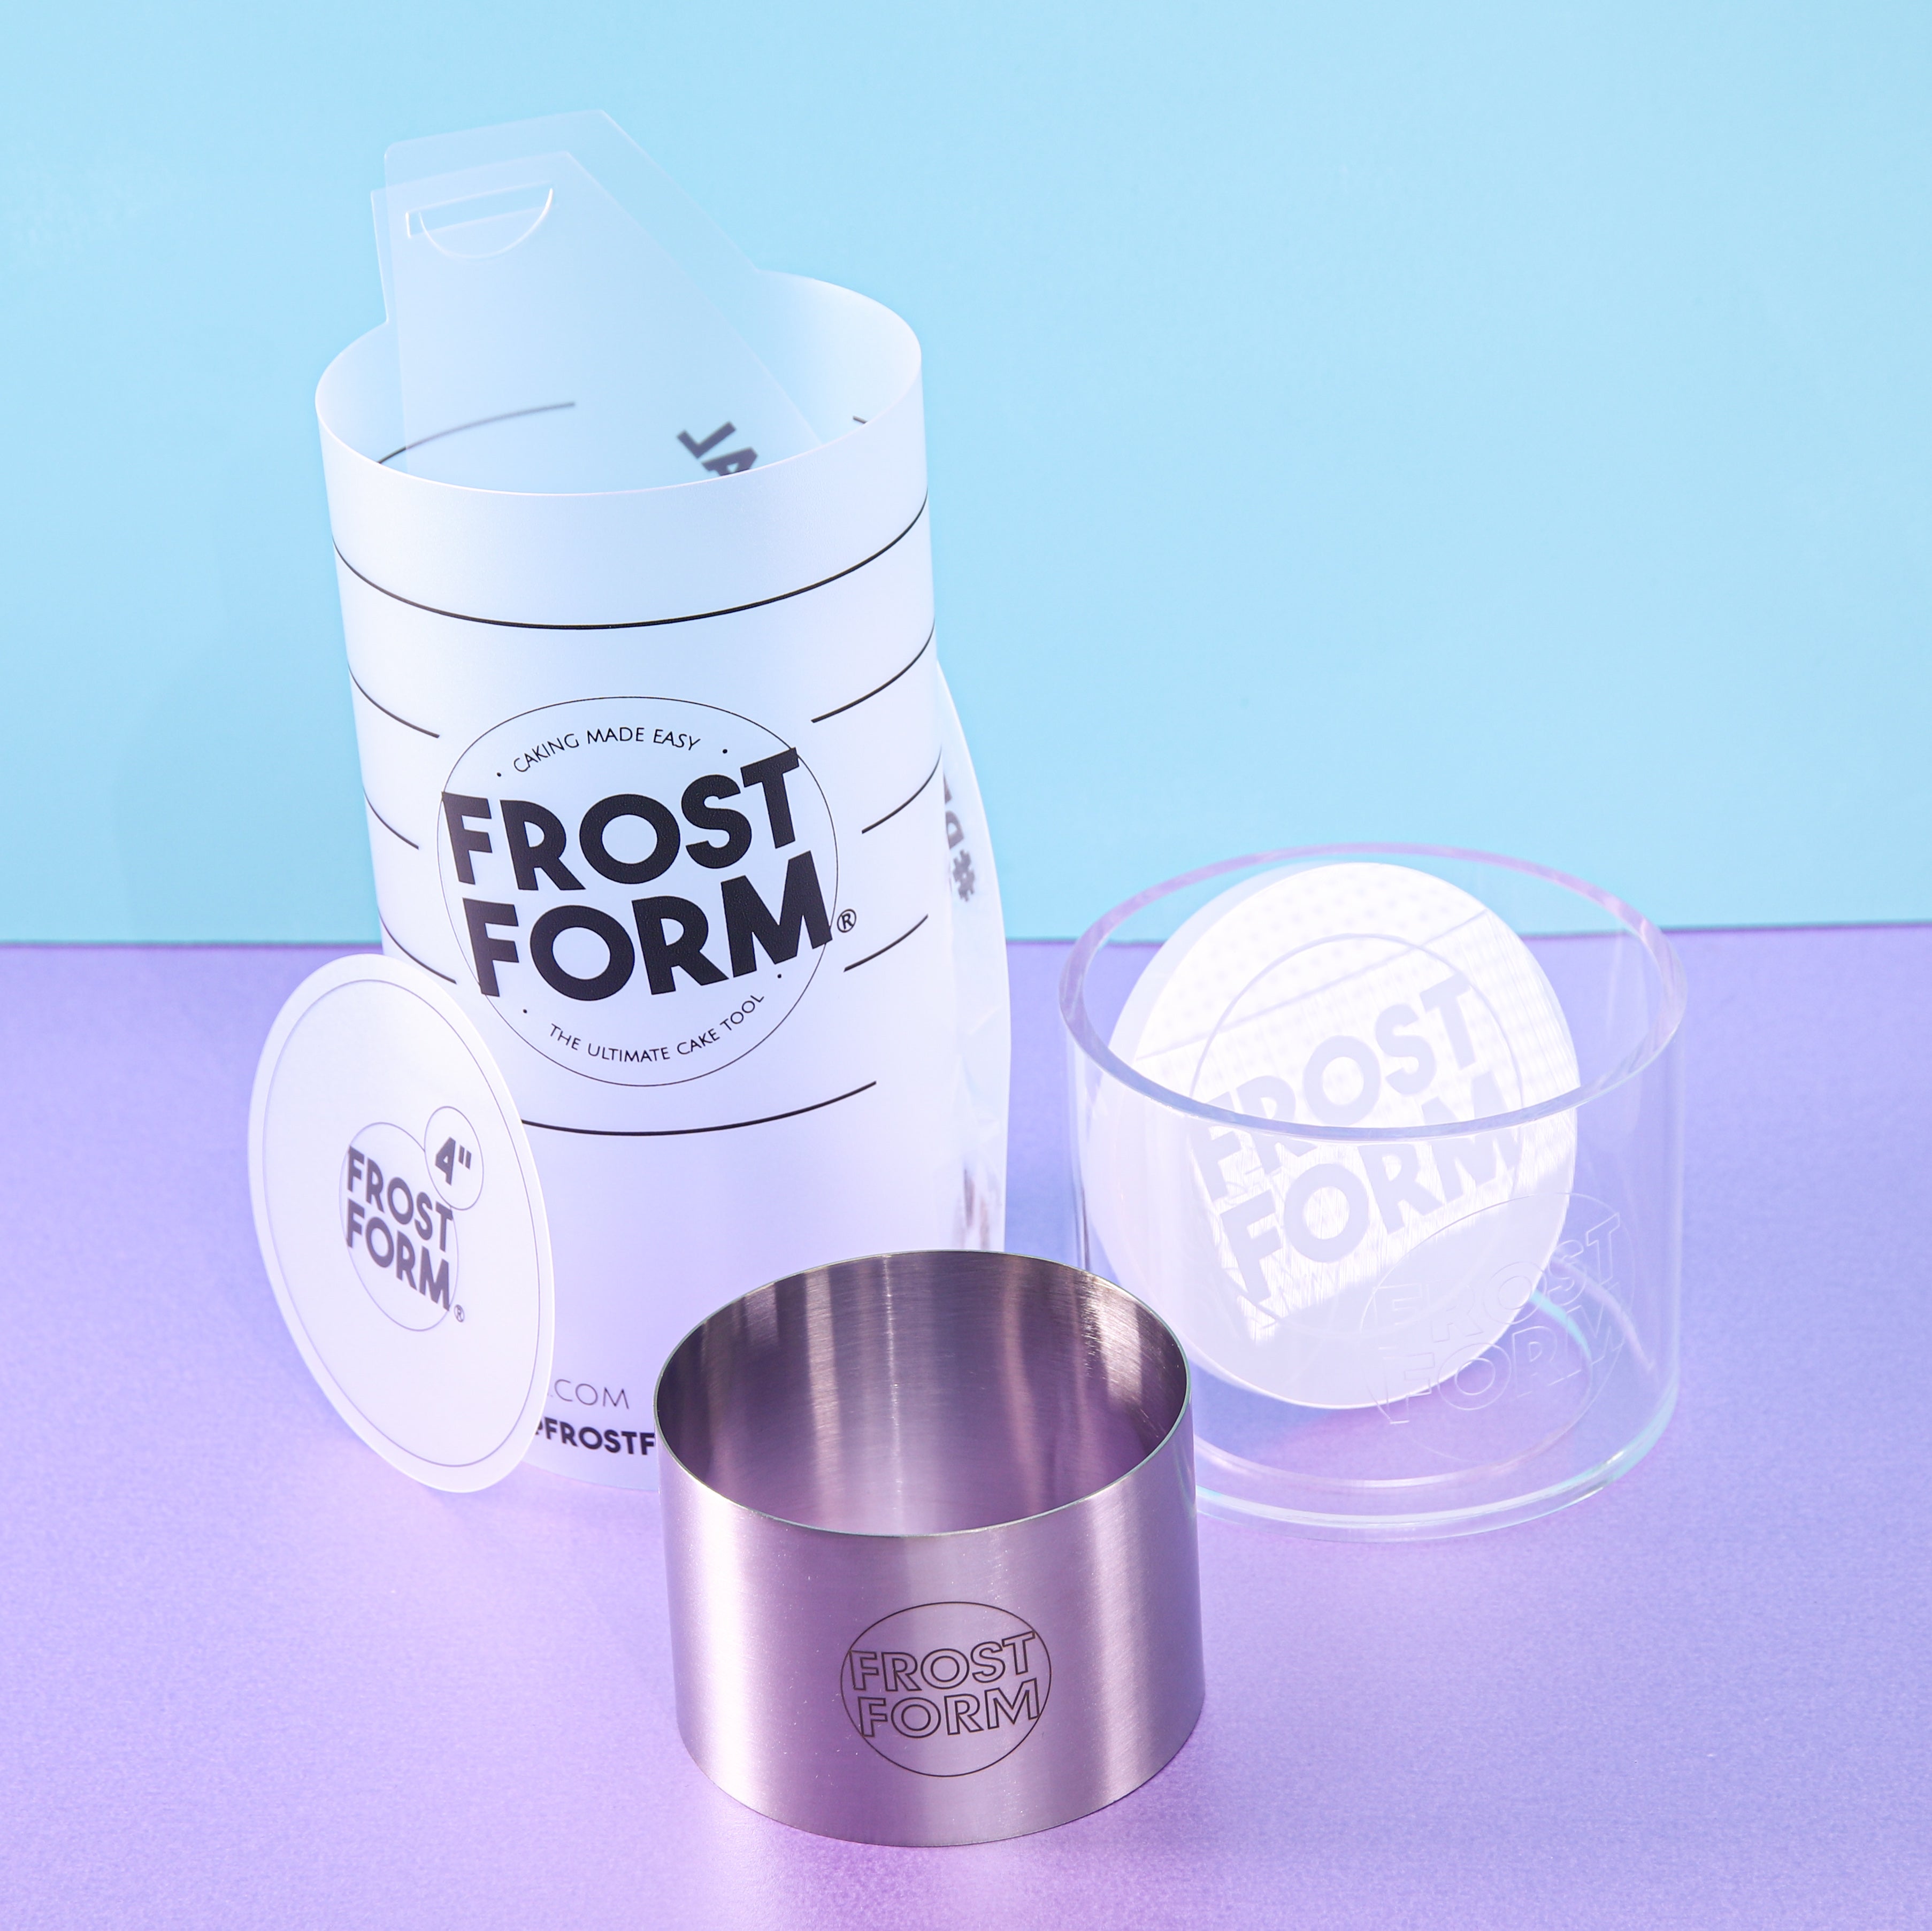 FROST FORM 💓 Back in stock! You have all been waiting - Cake